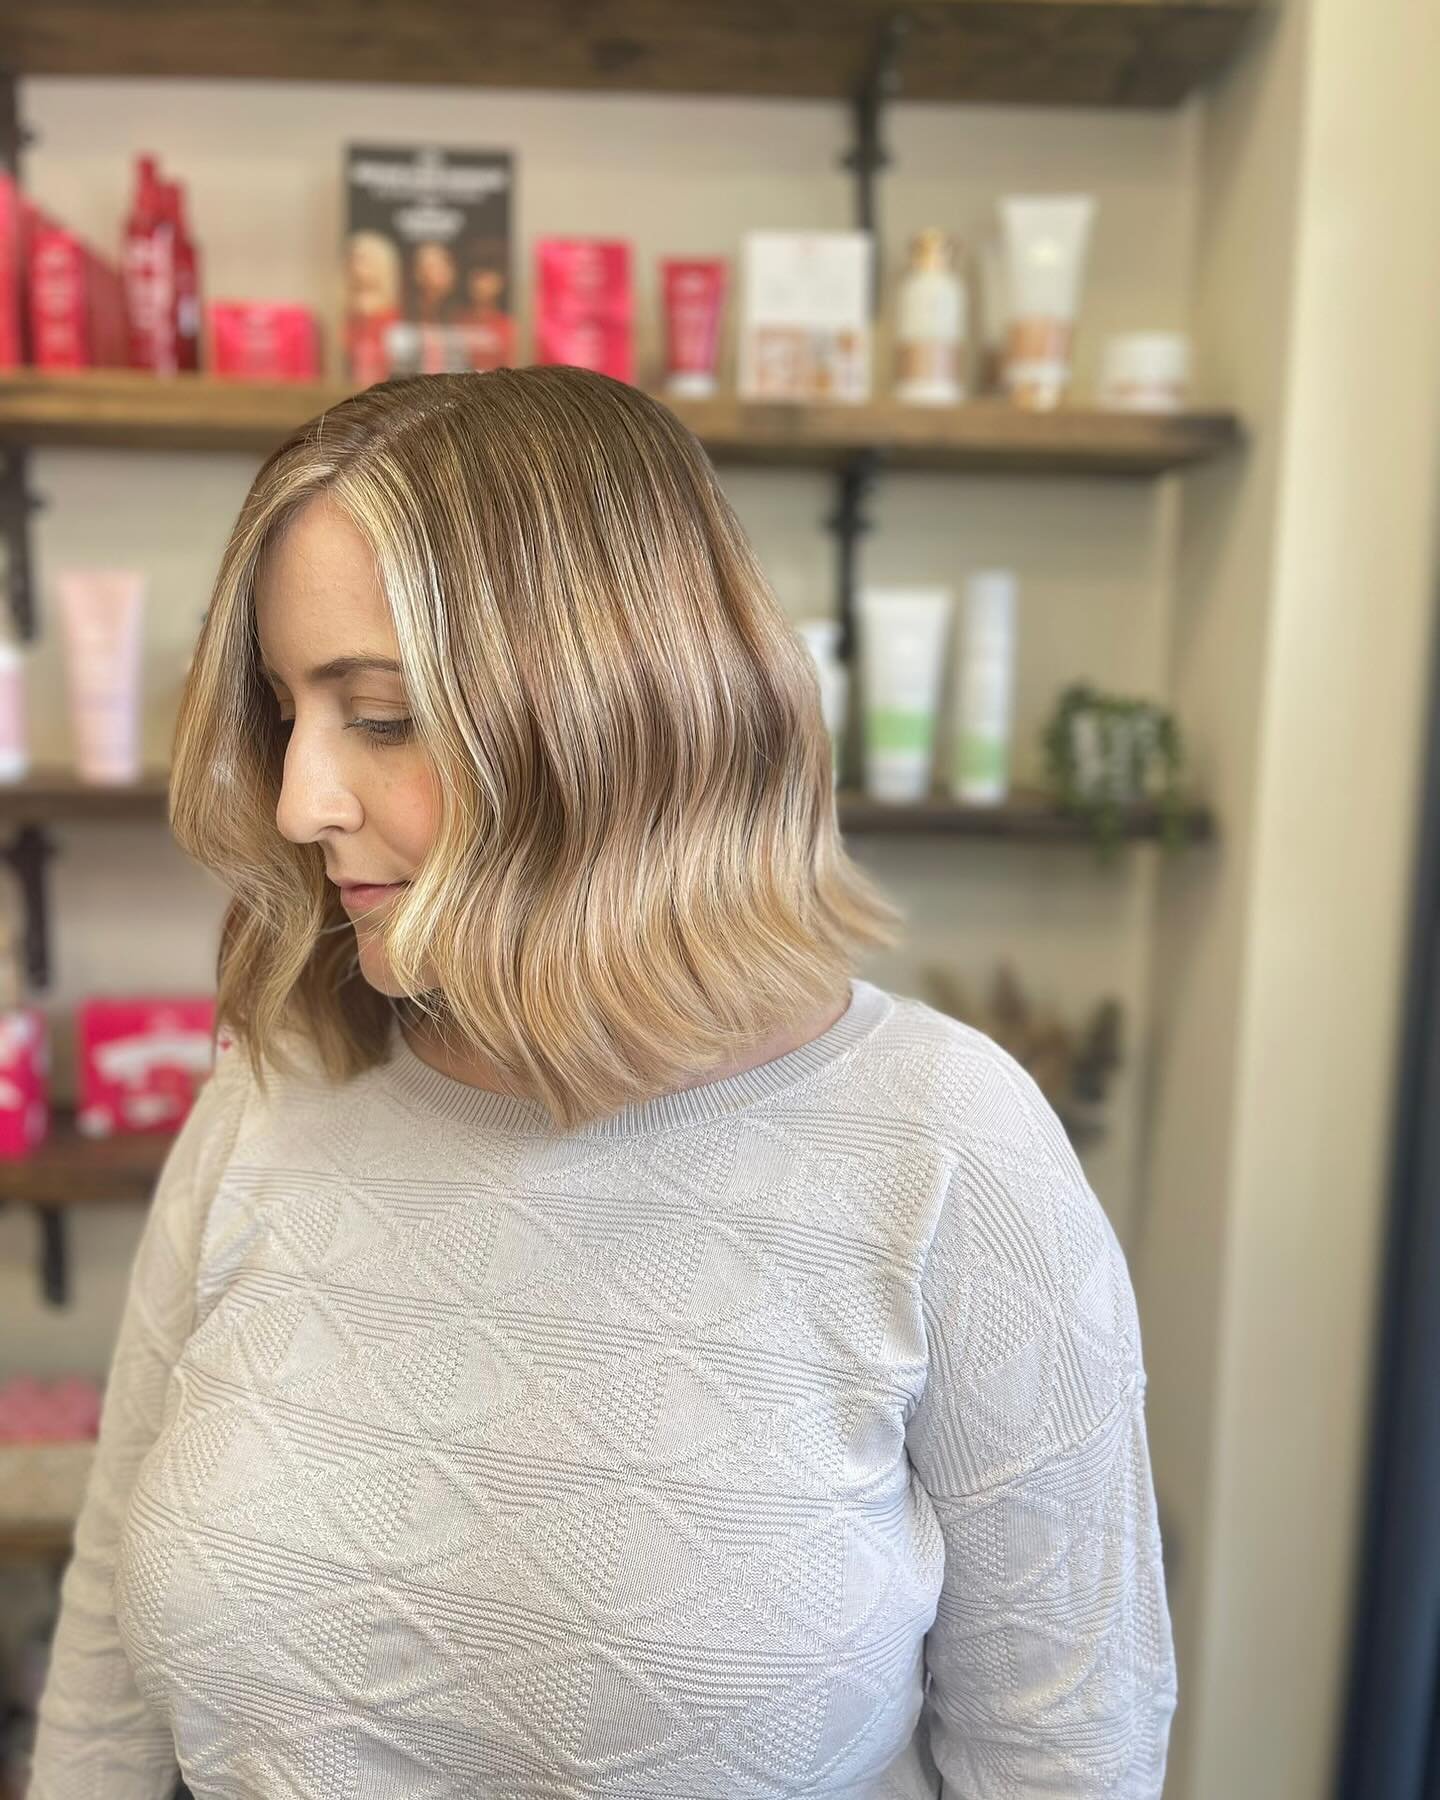 The most beautiful balayage and baby money piece by our Lucy! ✨
.
.
.
#balayage #moneypiece #salon #surrey #easthorsley